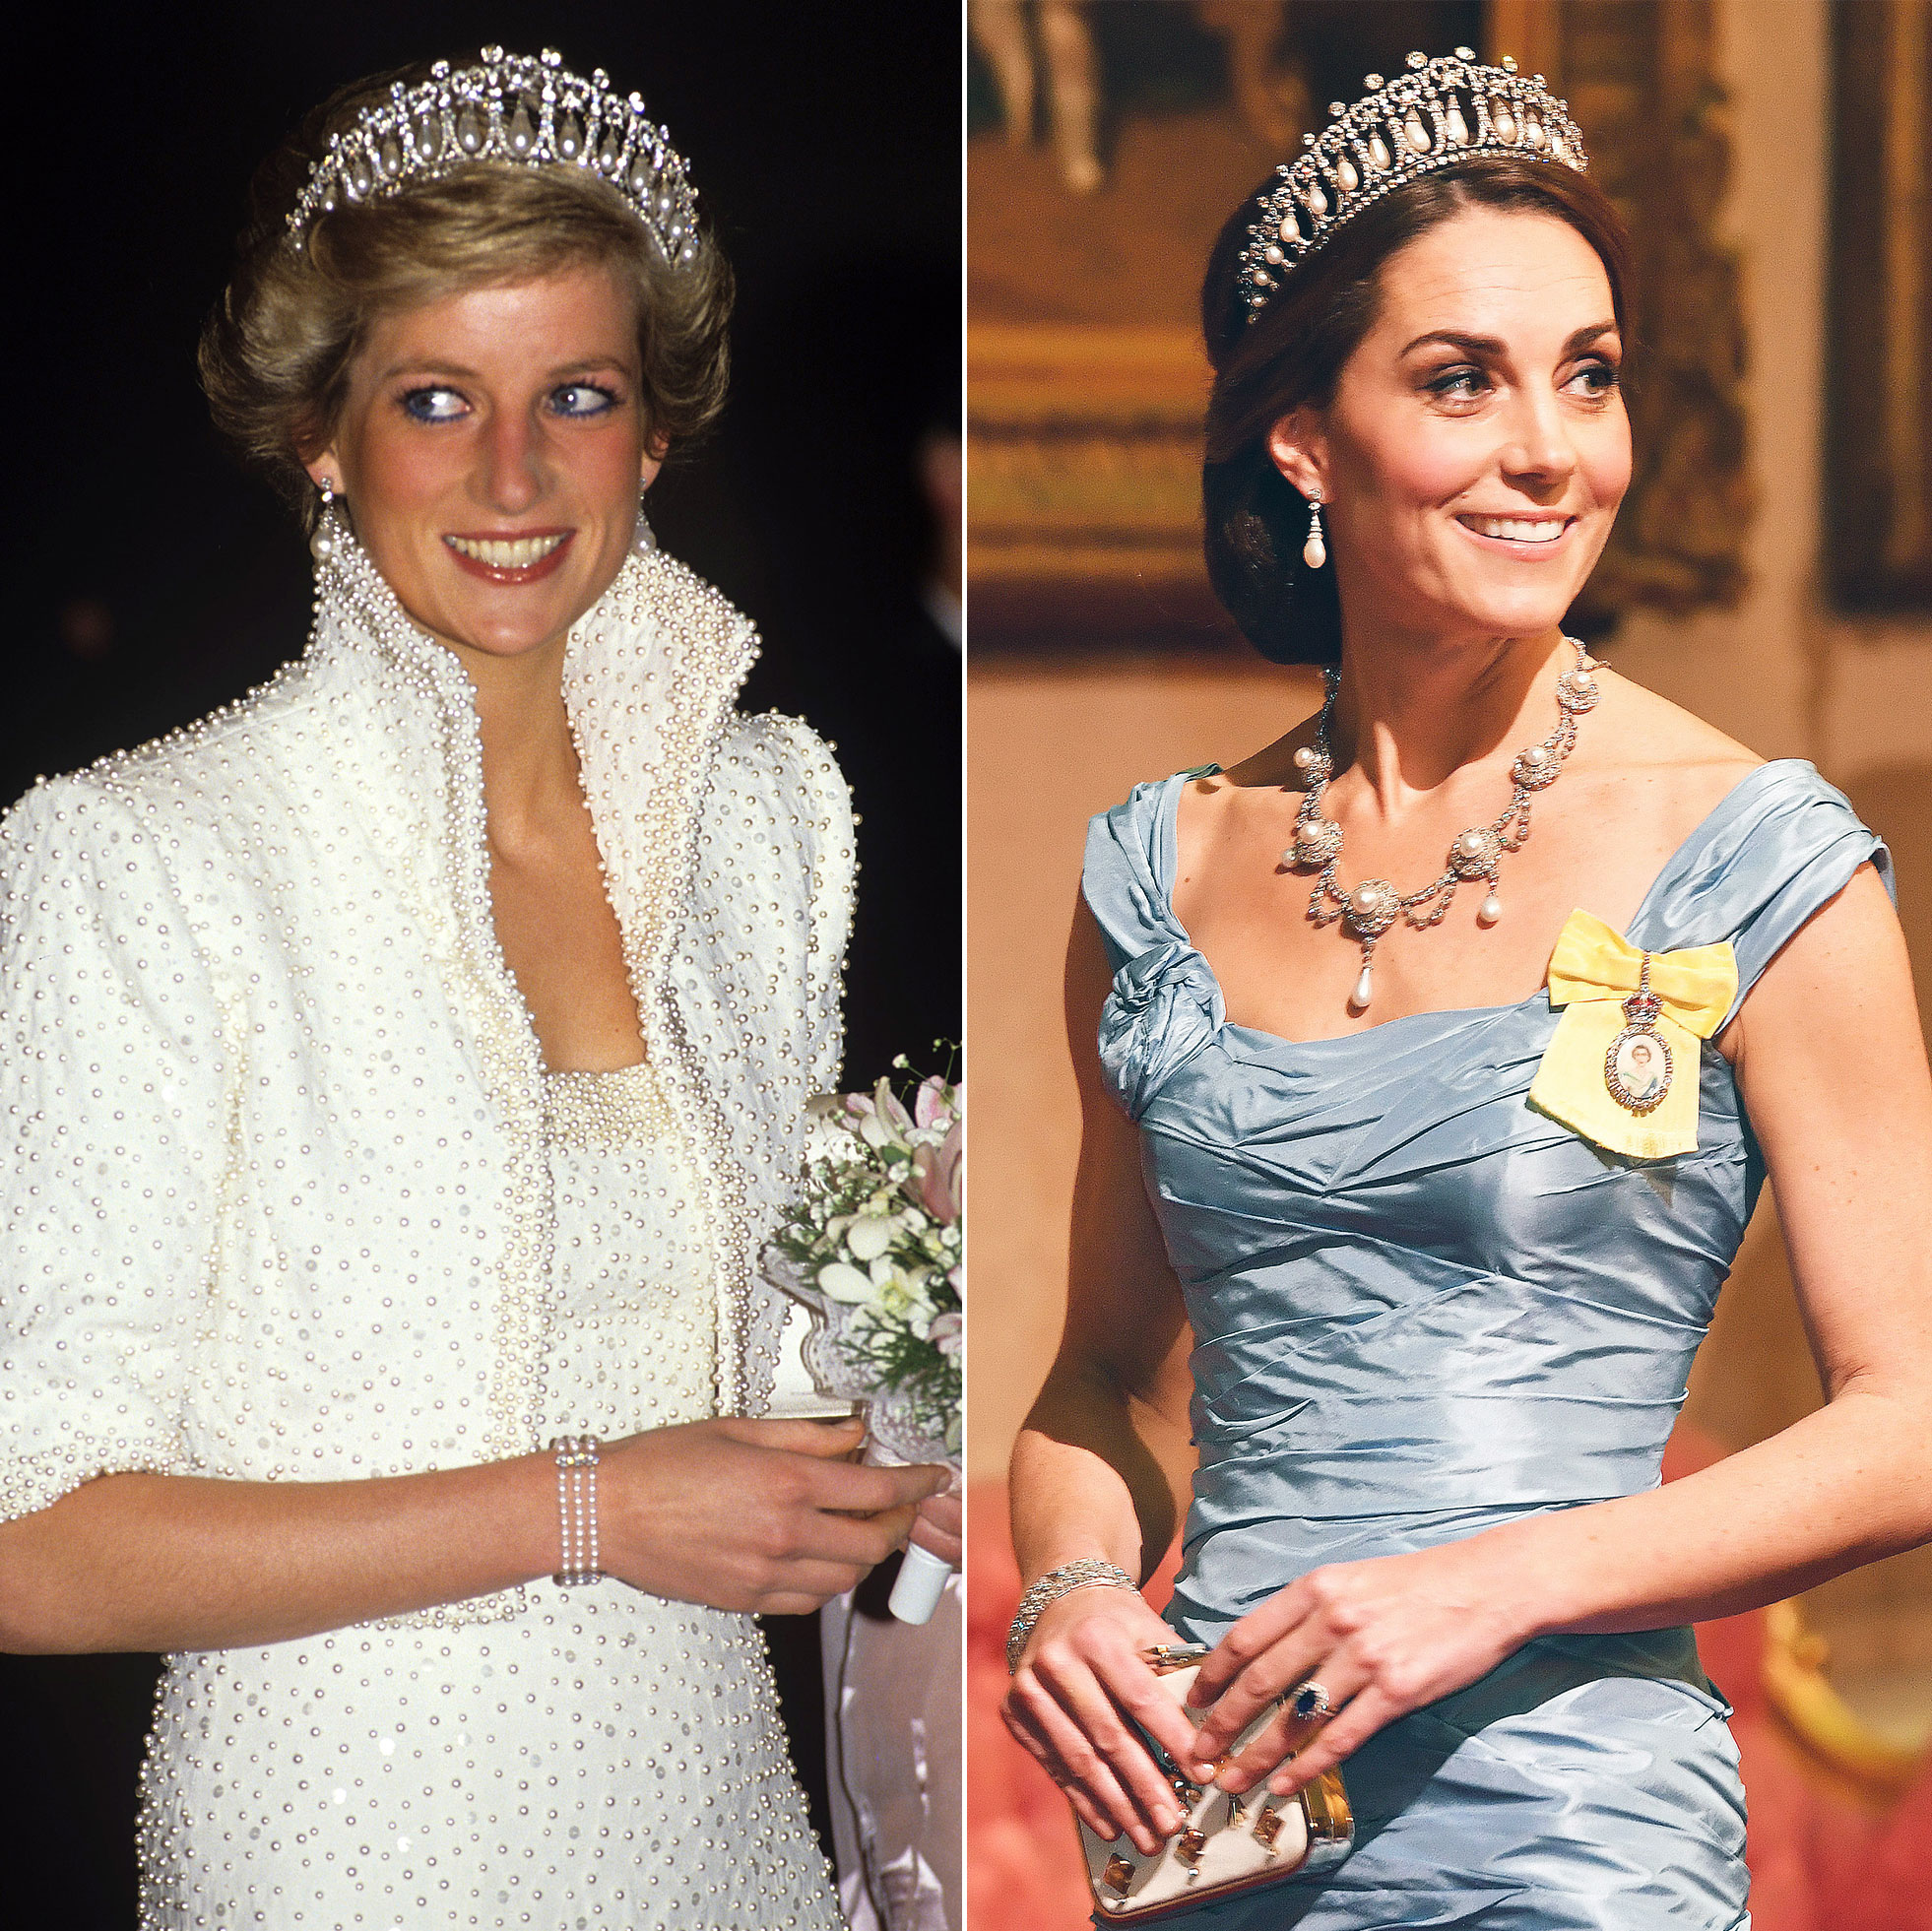 Queen Elizabeth II's Jewelry Worn by Kate Middleton, Princess Diana, More